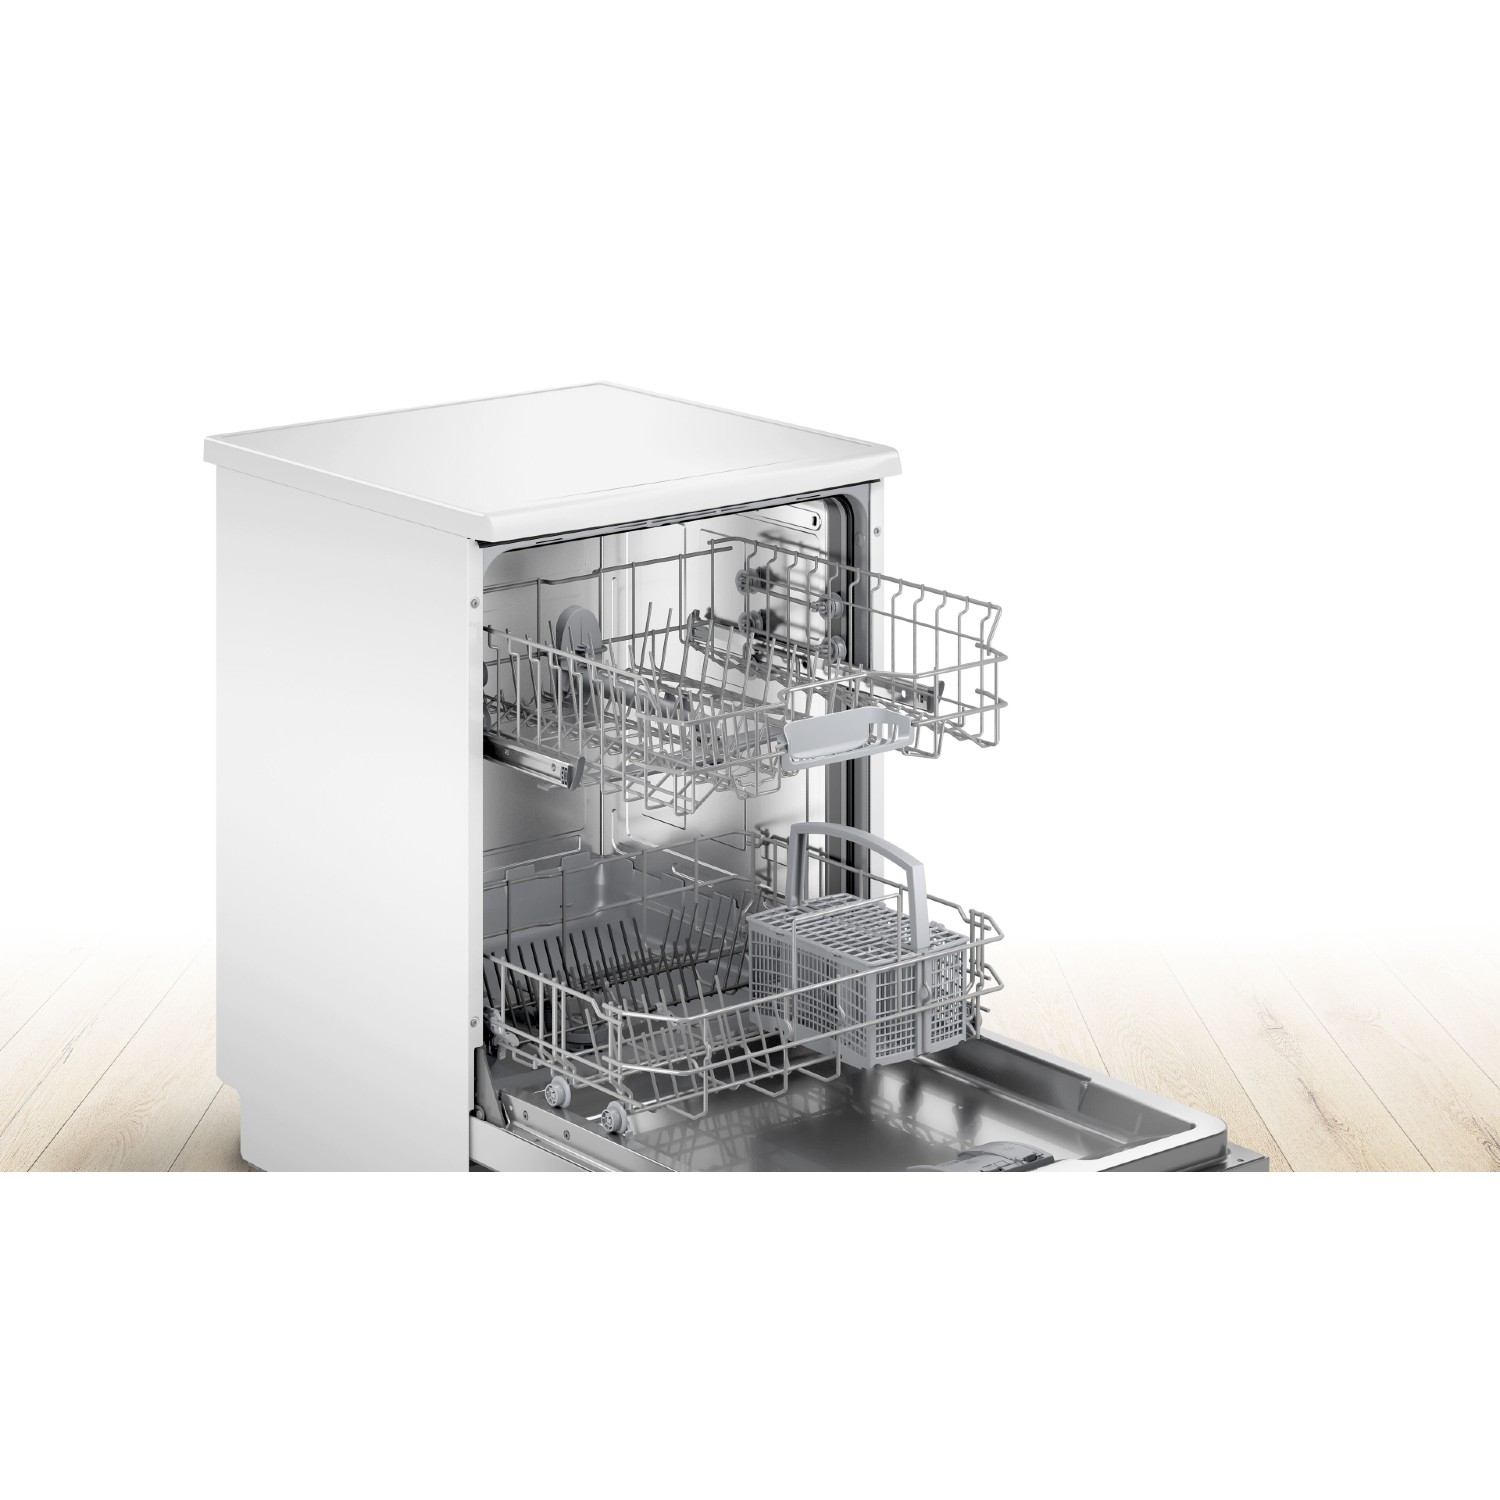 Bosch SMS2ITW08G Full Size Dishwasher - White - 12 Place Settings - 3